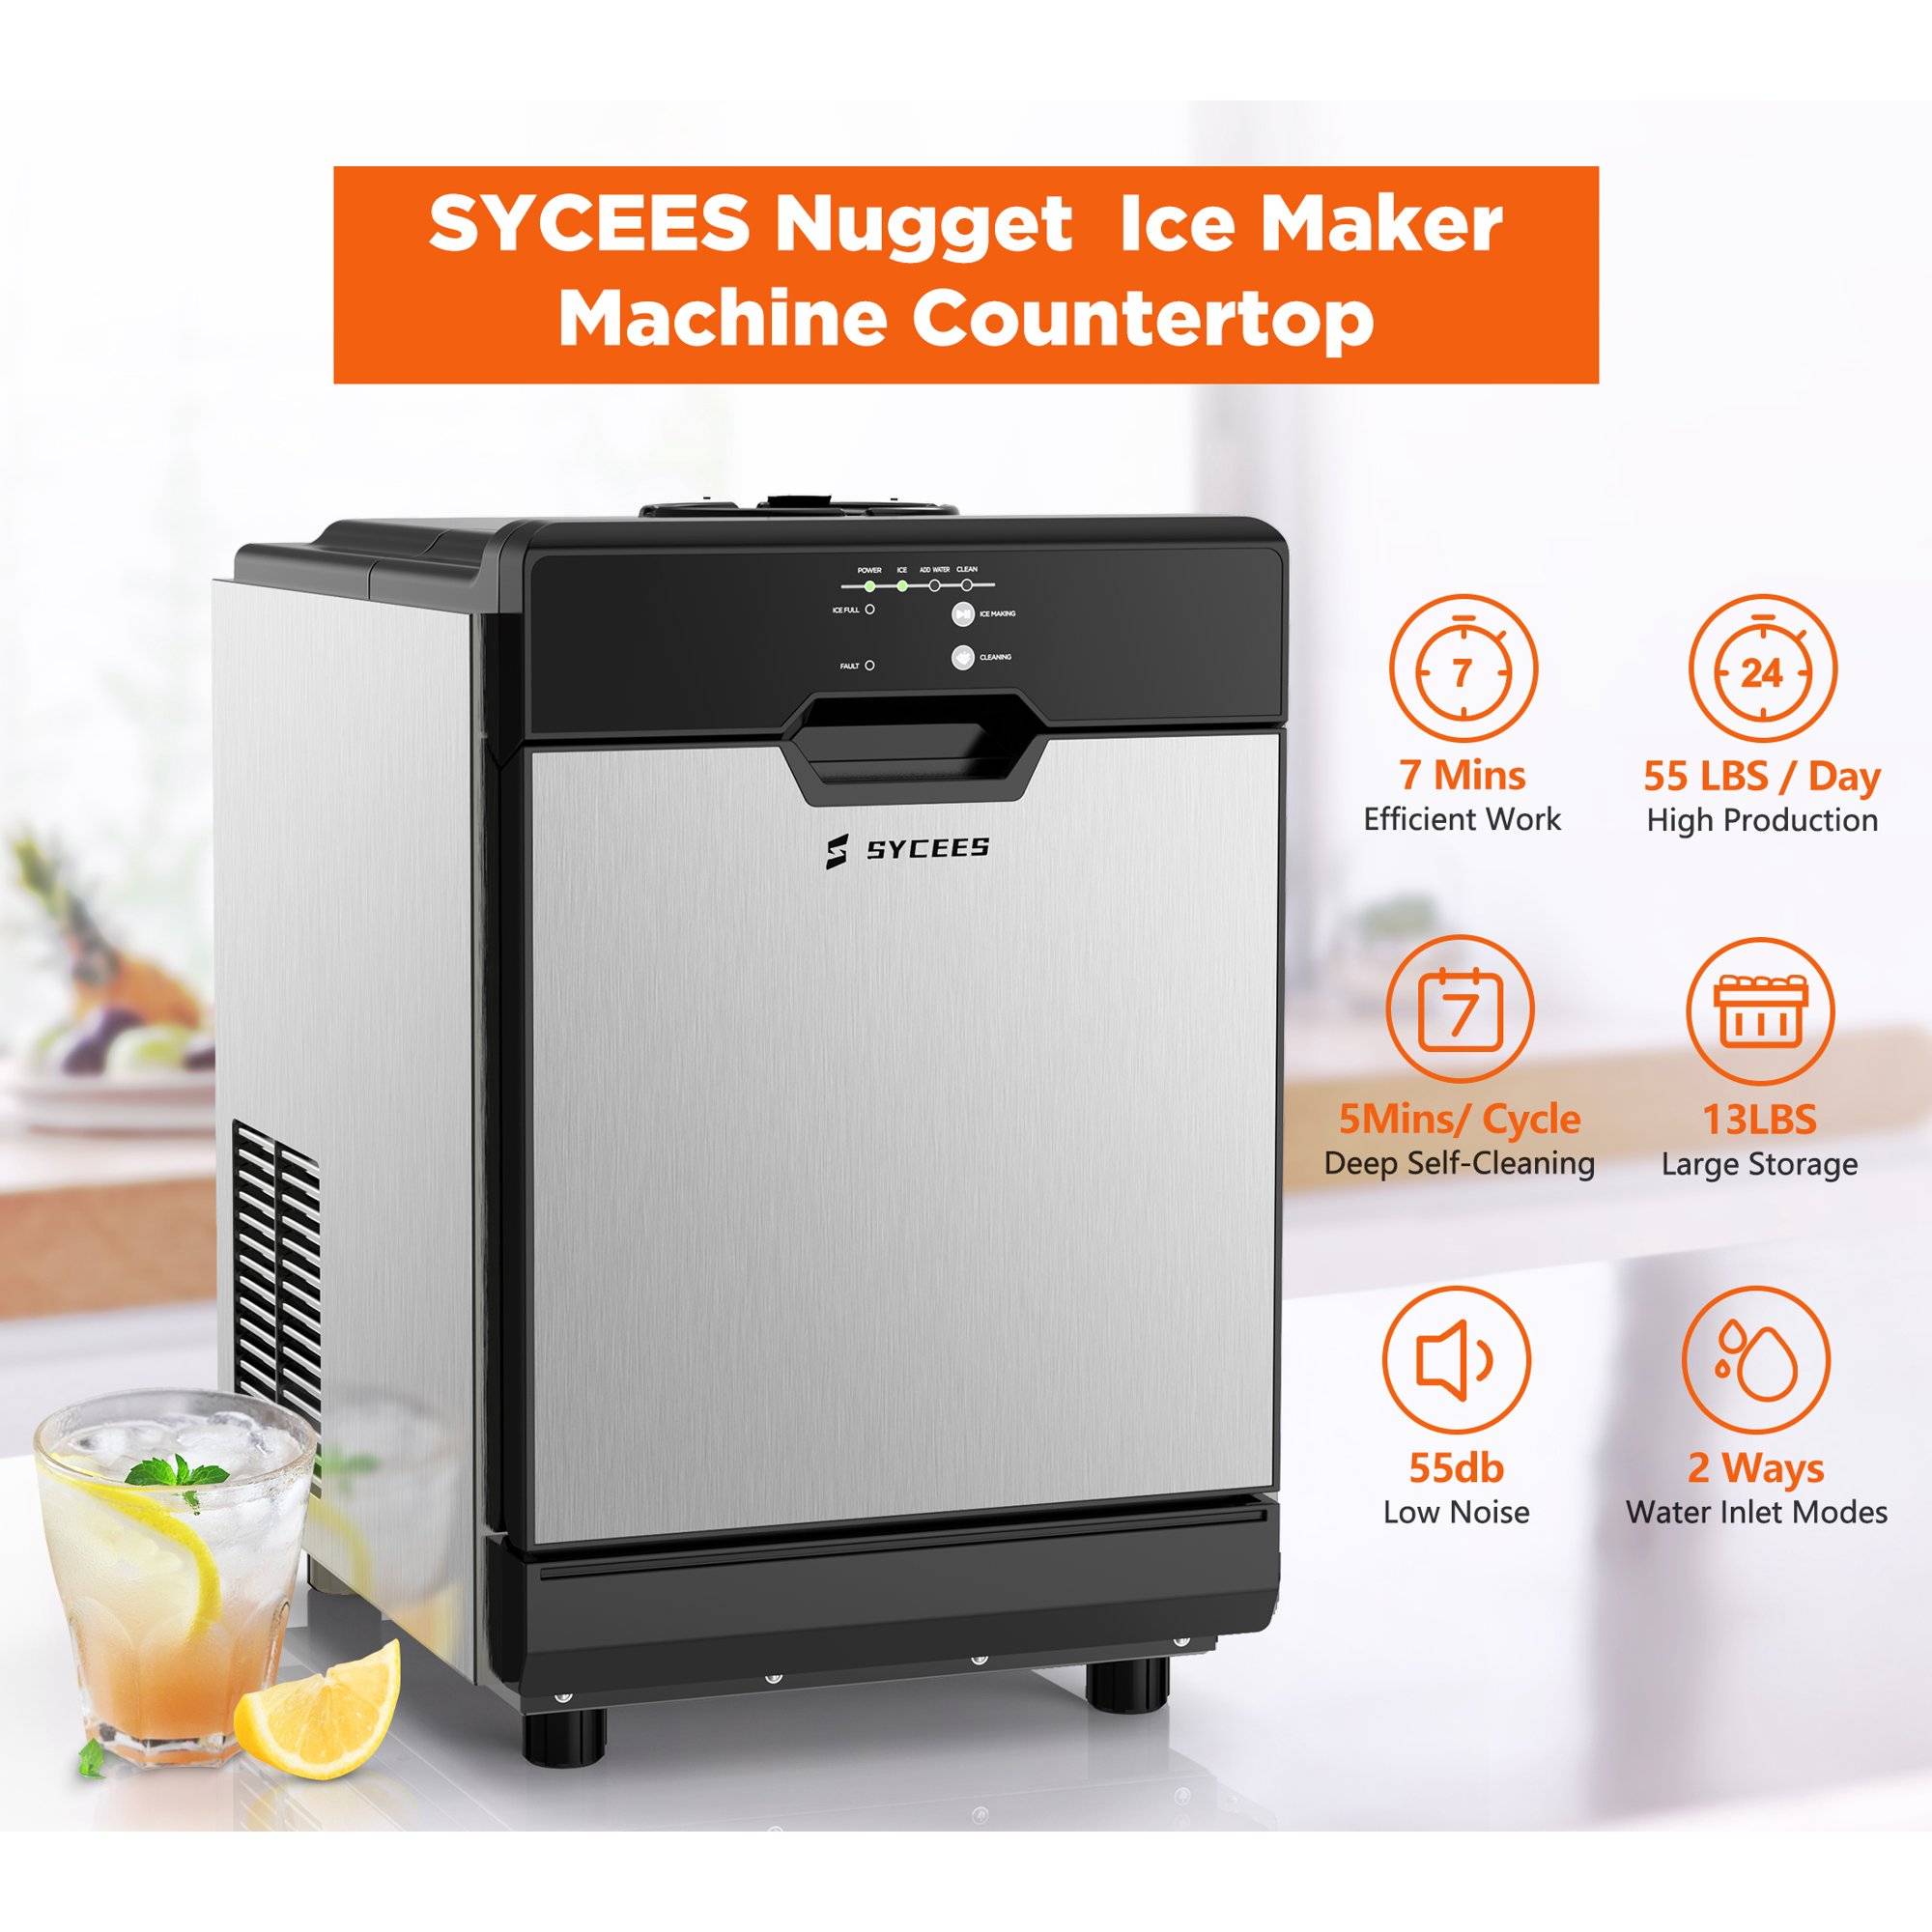 Nugget Ice Maker Countertop, 55 Lbs/Day, Chewable Ice Maker, Rapid